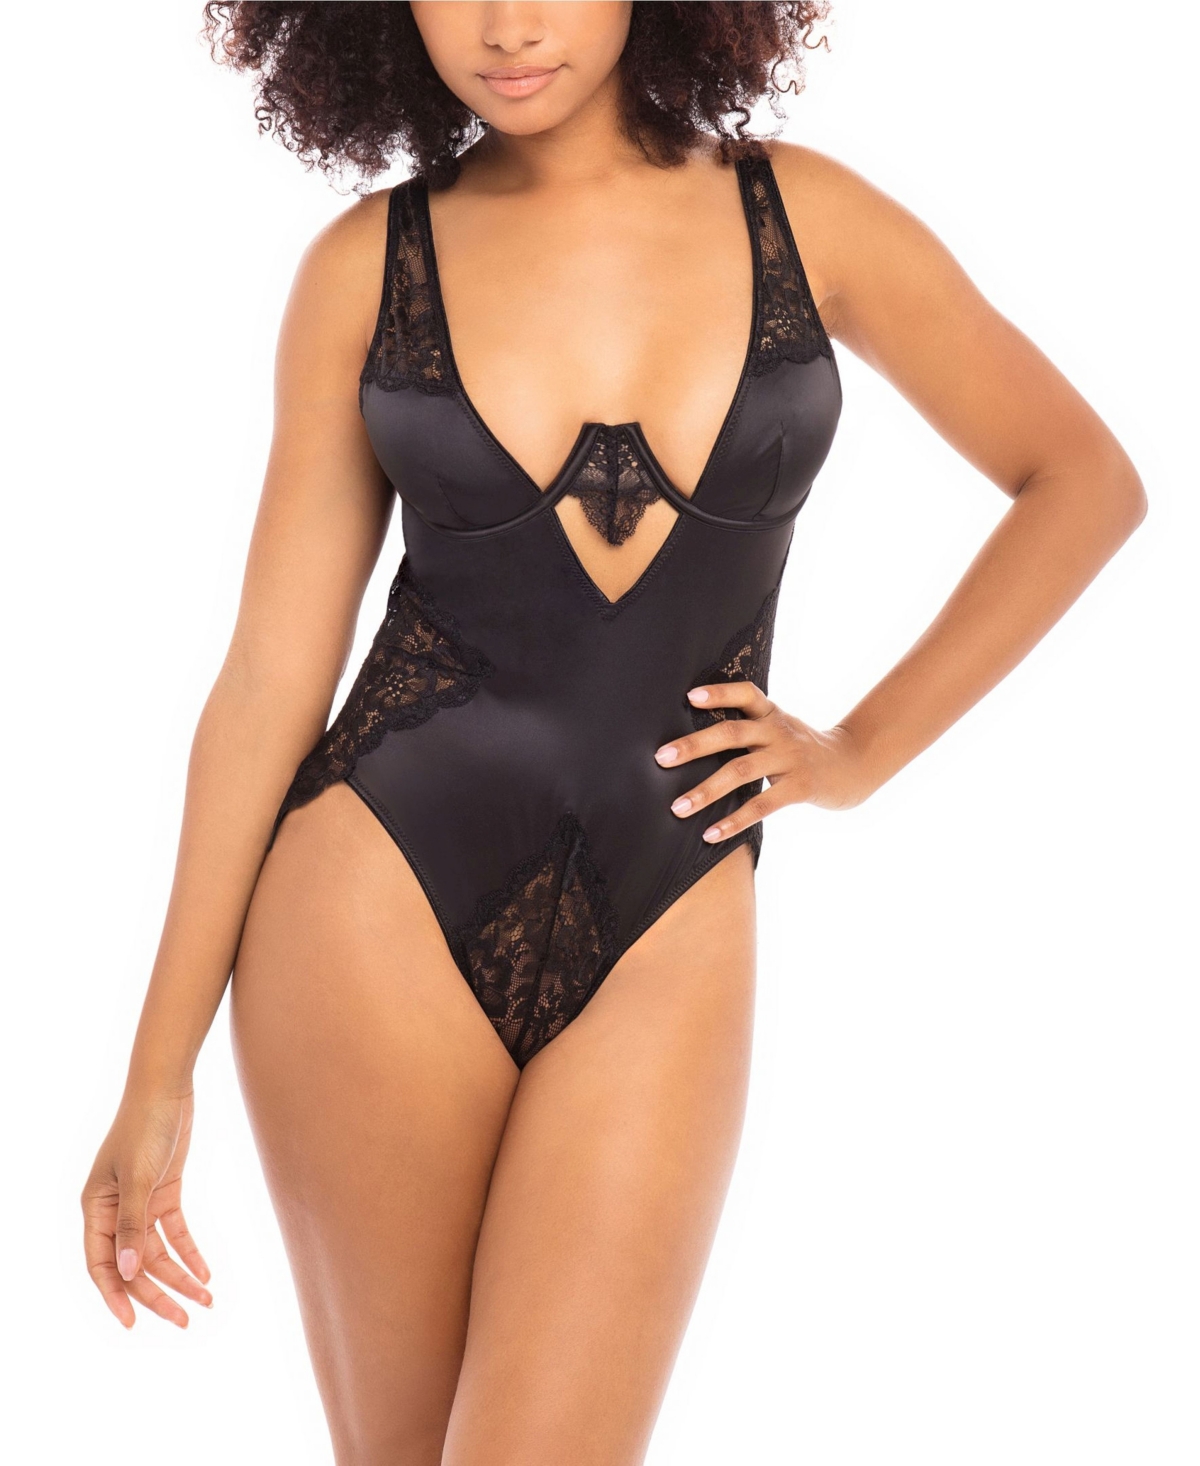 Women's High Apex Teddy Lingerie with Deep Plunging Neckline and Lace Inserts - Black